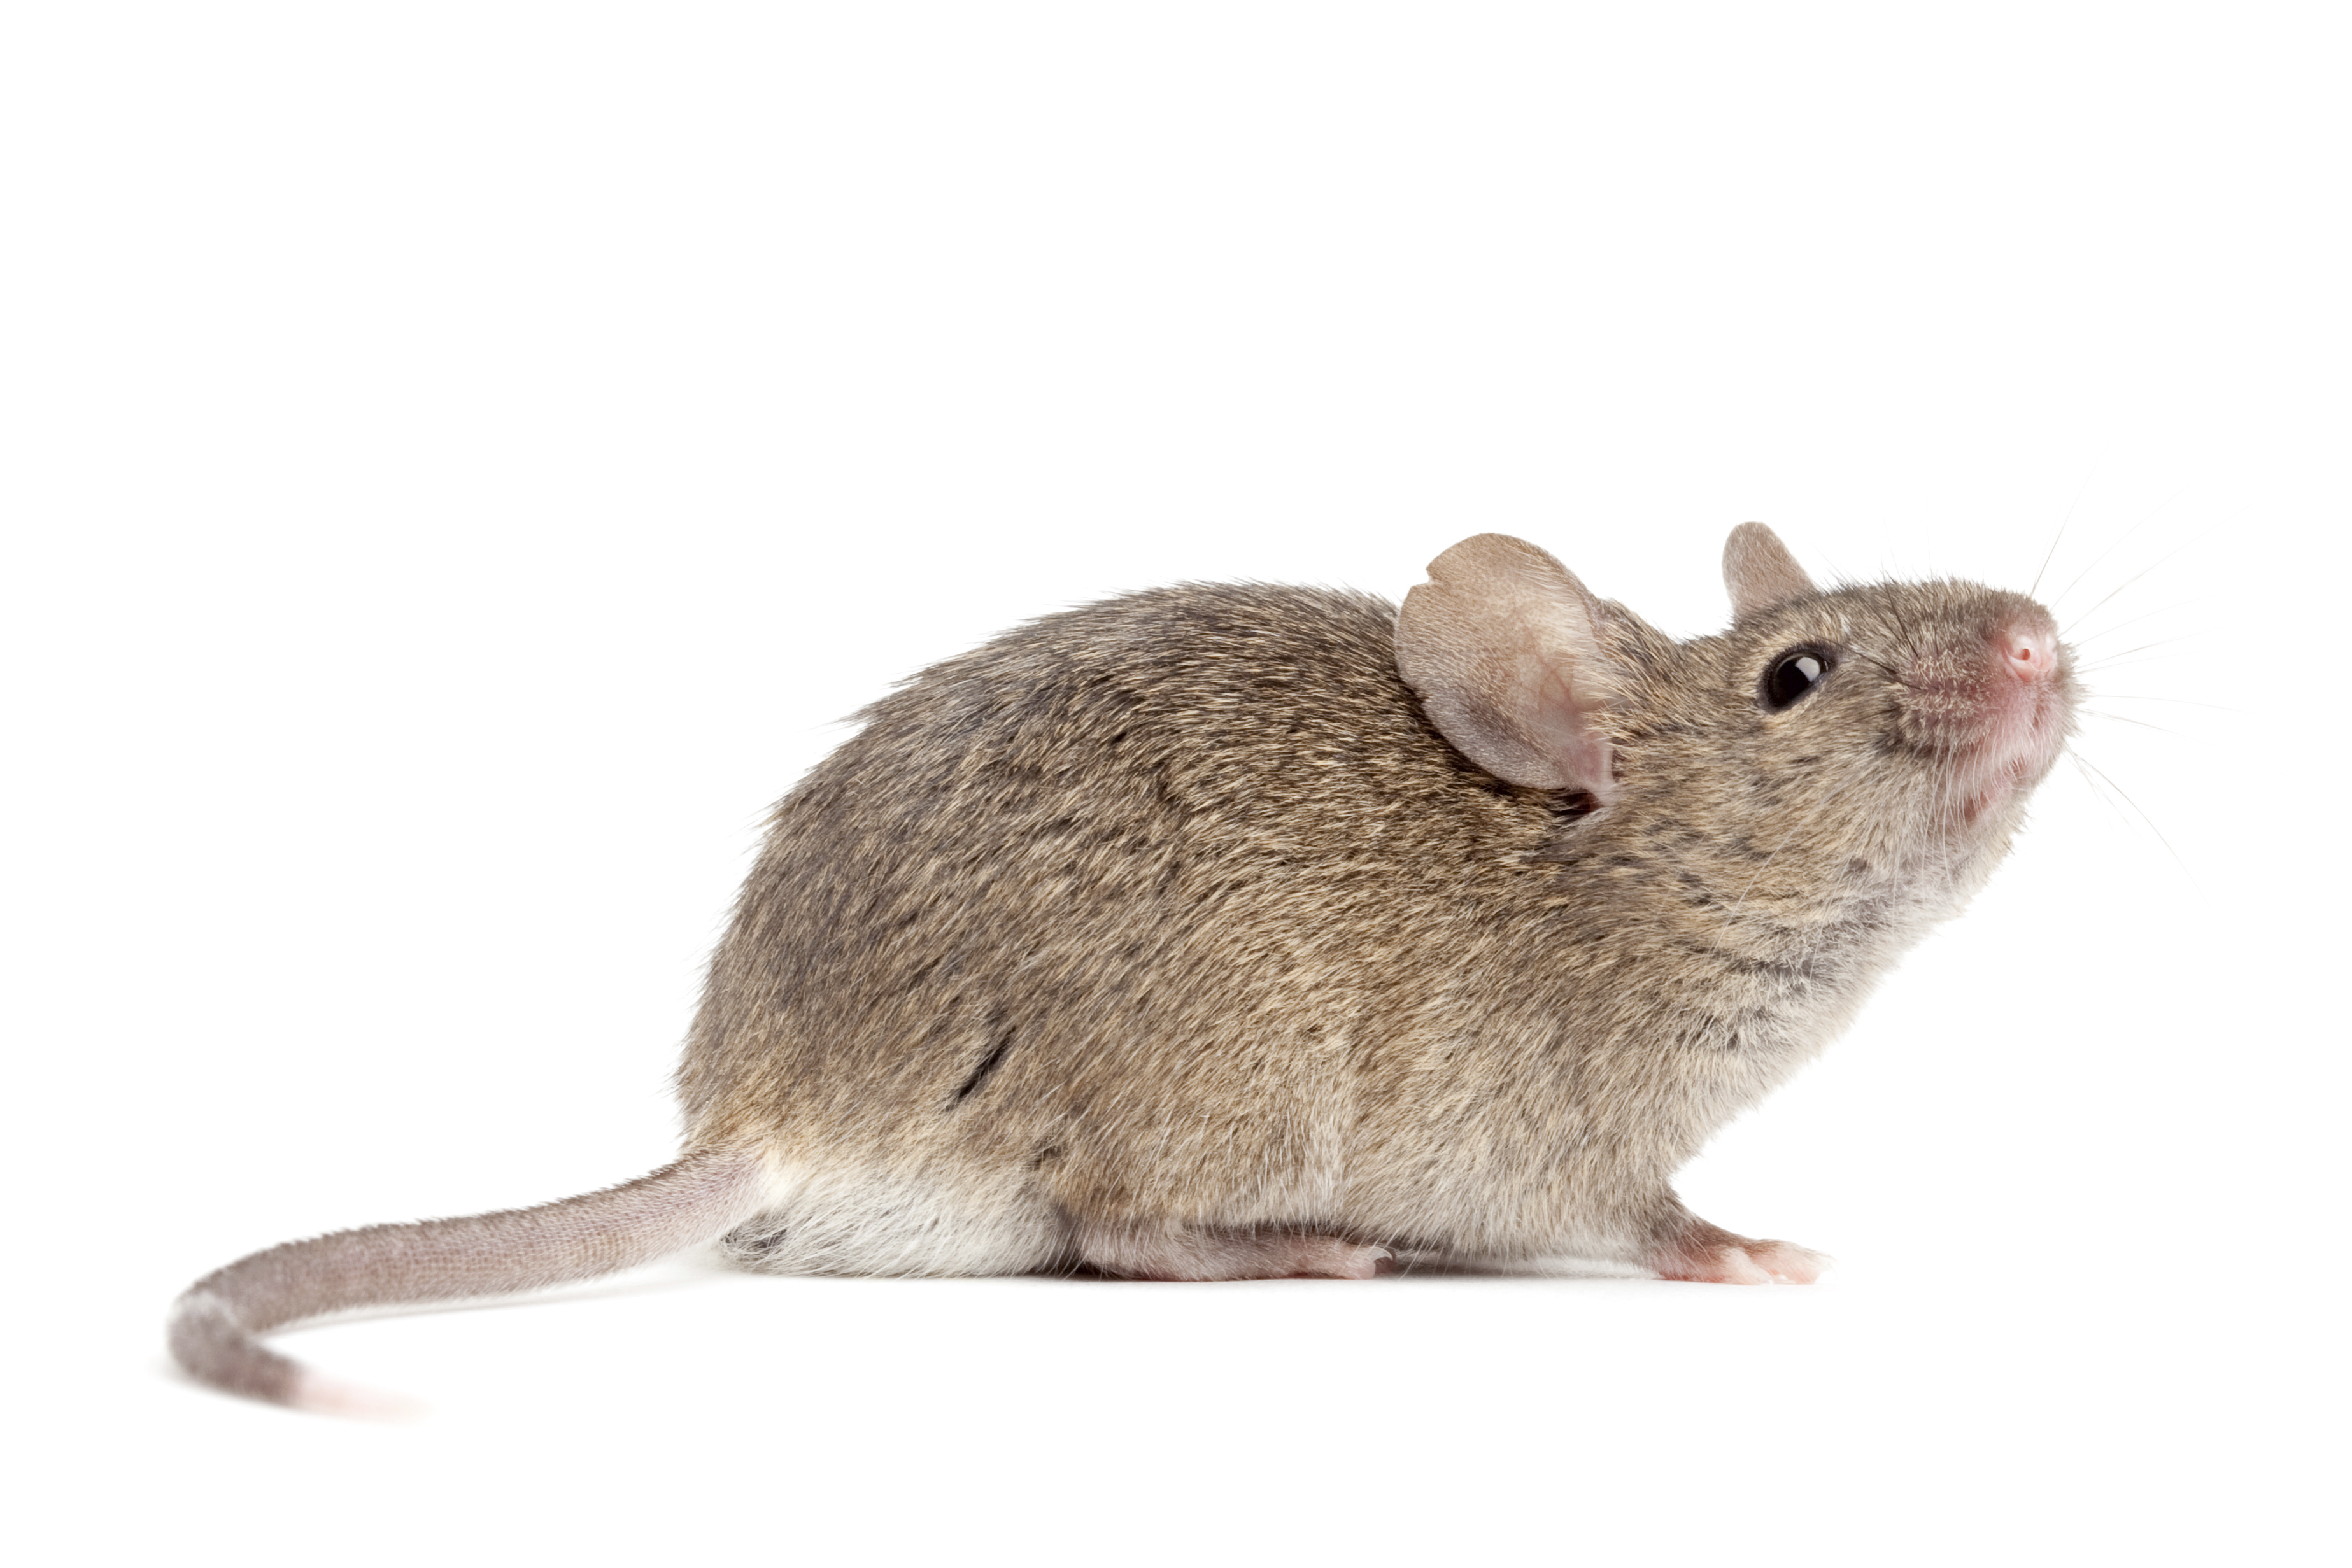 Even cute rodents like house mice can cause damage and spread disease.